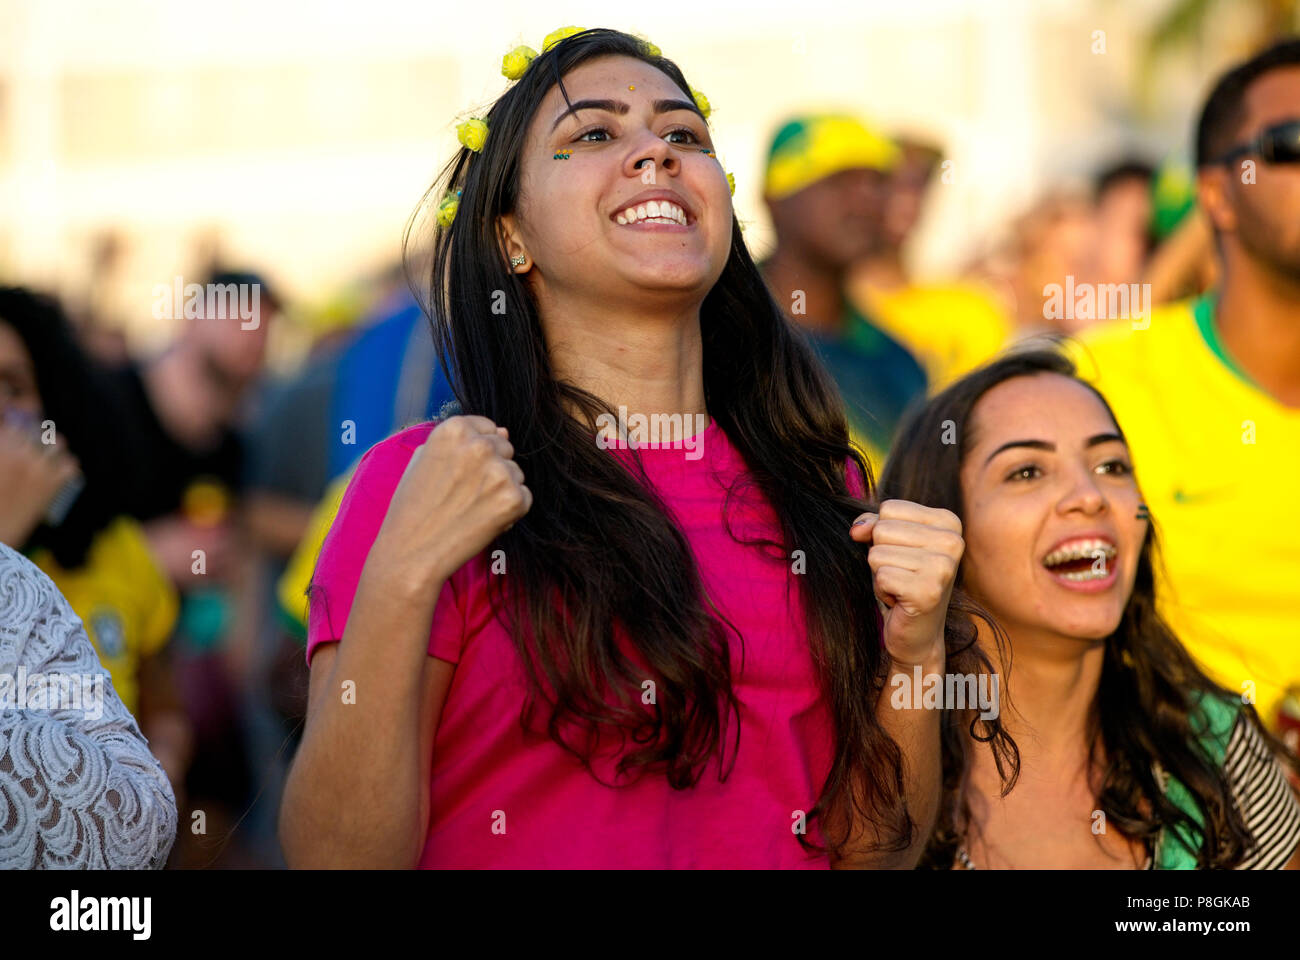 World Cup - July 6, 2018: Brazil soccer fans celebrate their team's goal against Belgium as they watch a live broadcast in Rio de Janeiro Stock Photo